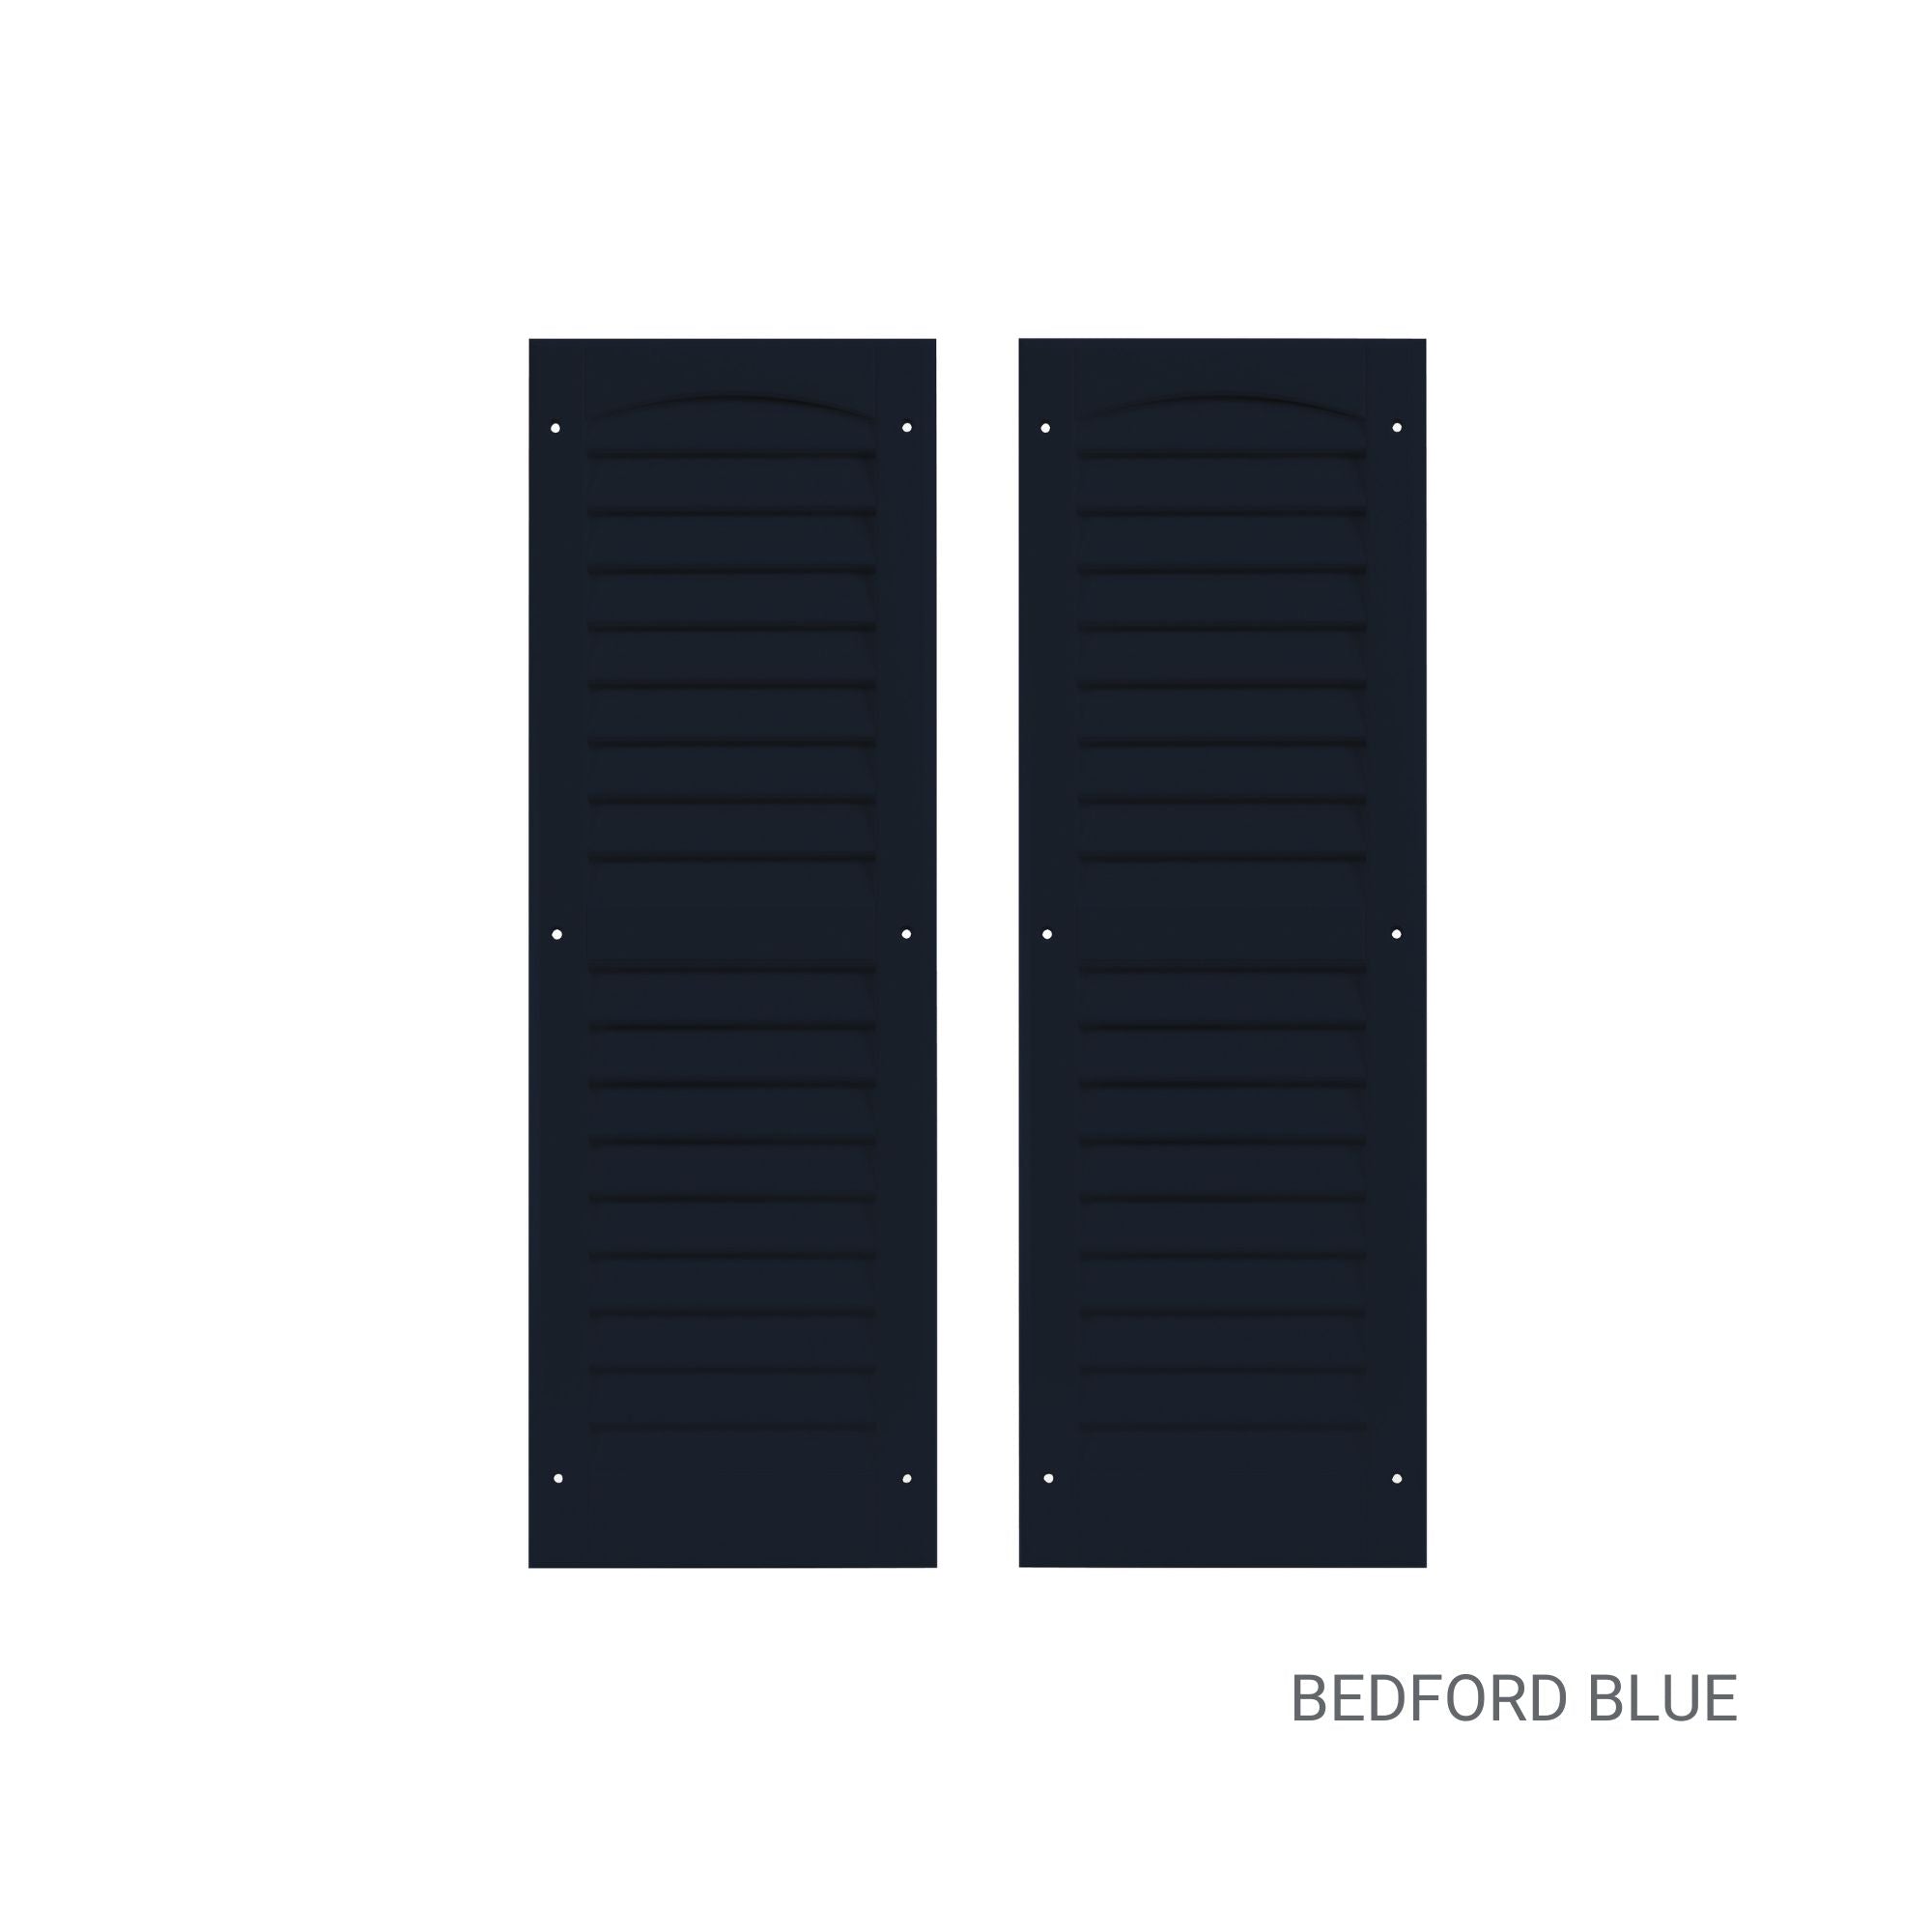 Pair of 9" W x 27" H Louvered Bedford Blue Shutters for Sheds, Playhouses, and MORE